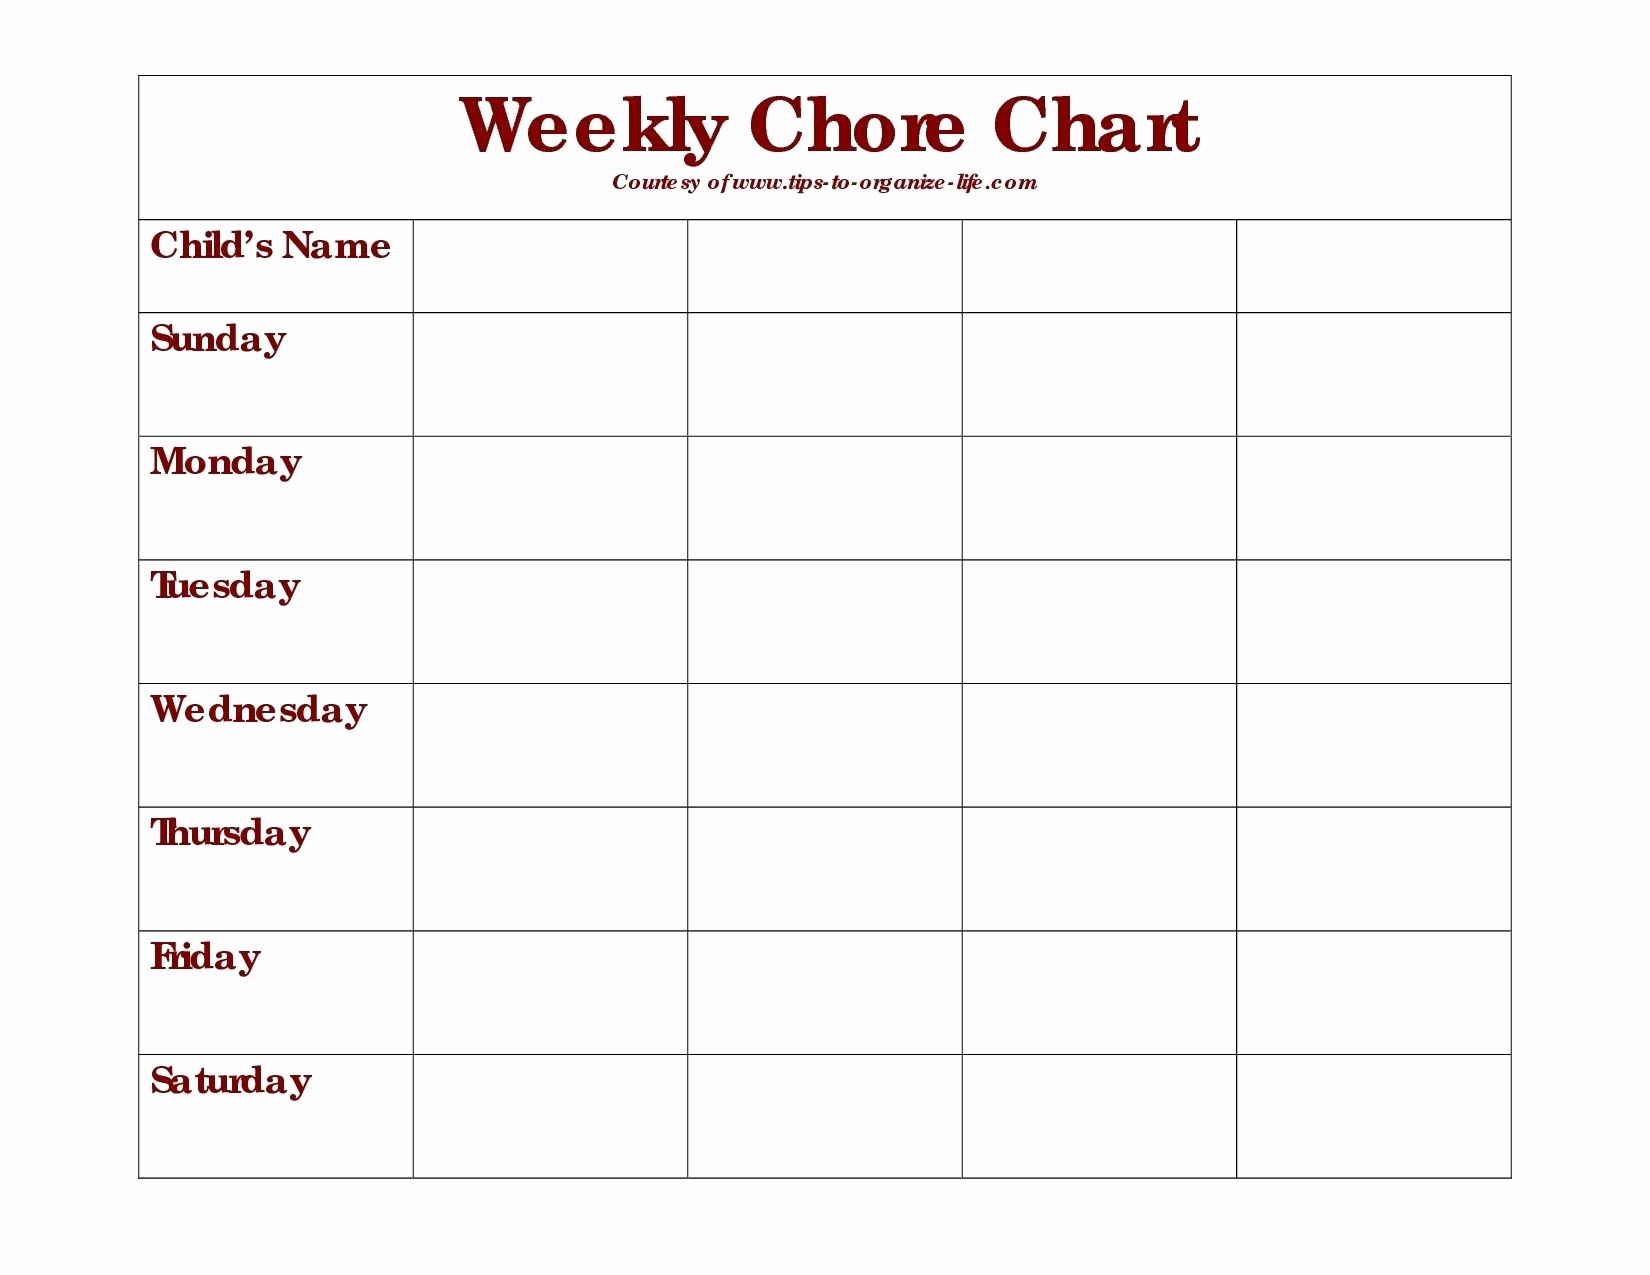 Free Printable Family Chore Charts Awesome Daily Chore Chart Printable Ibovnathandedecker within